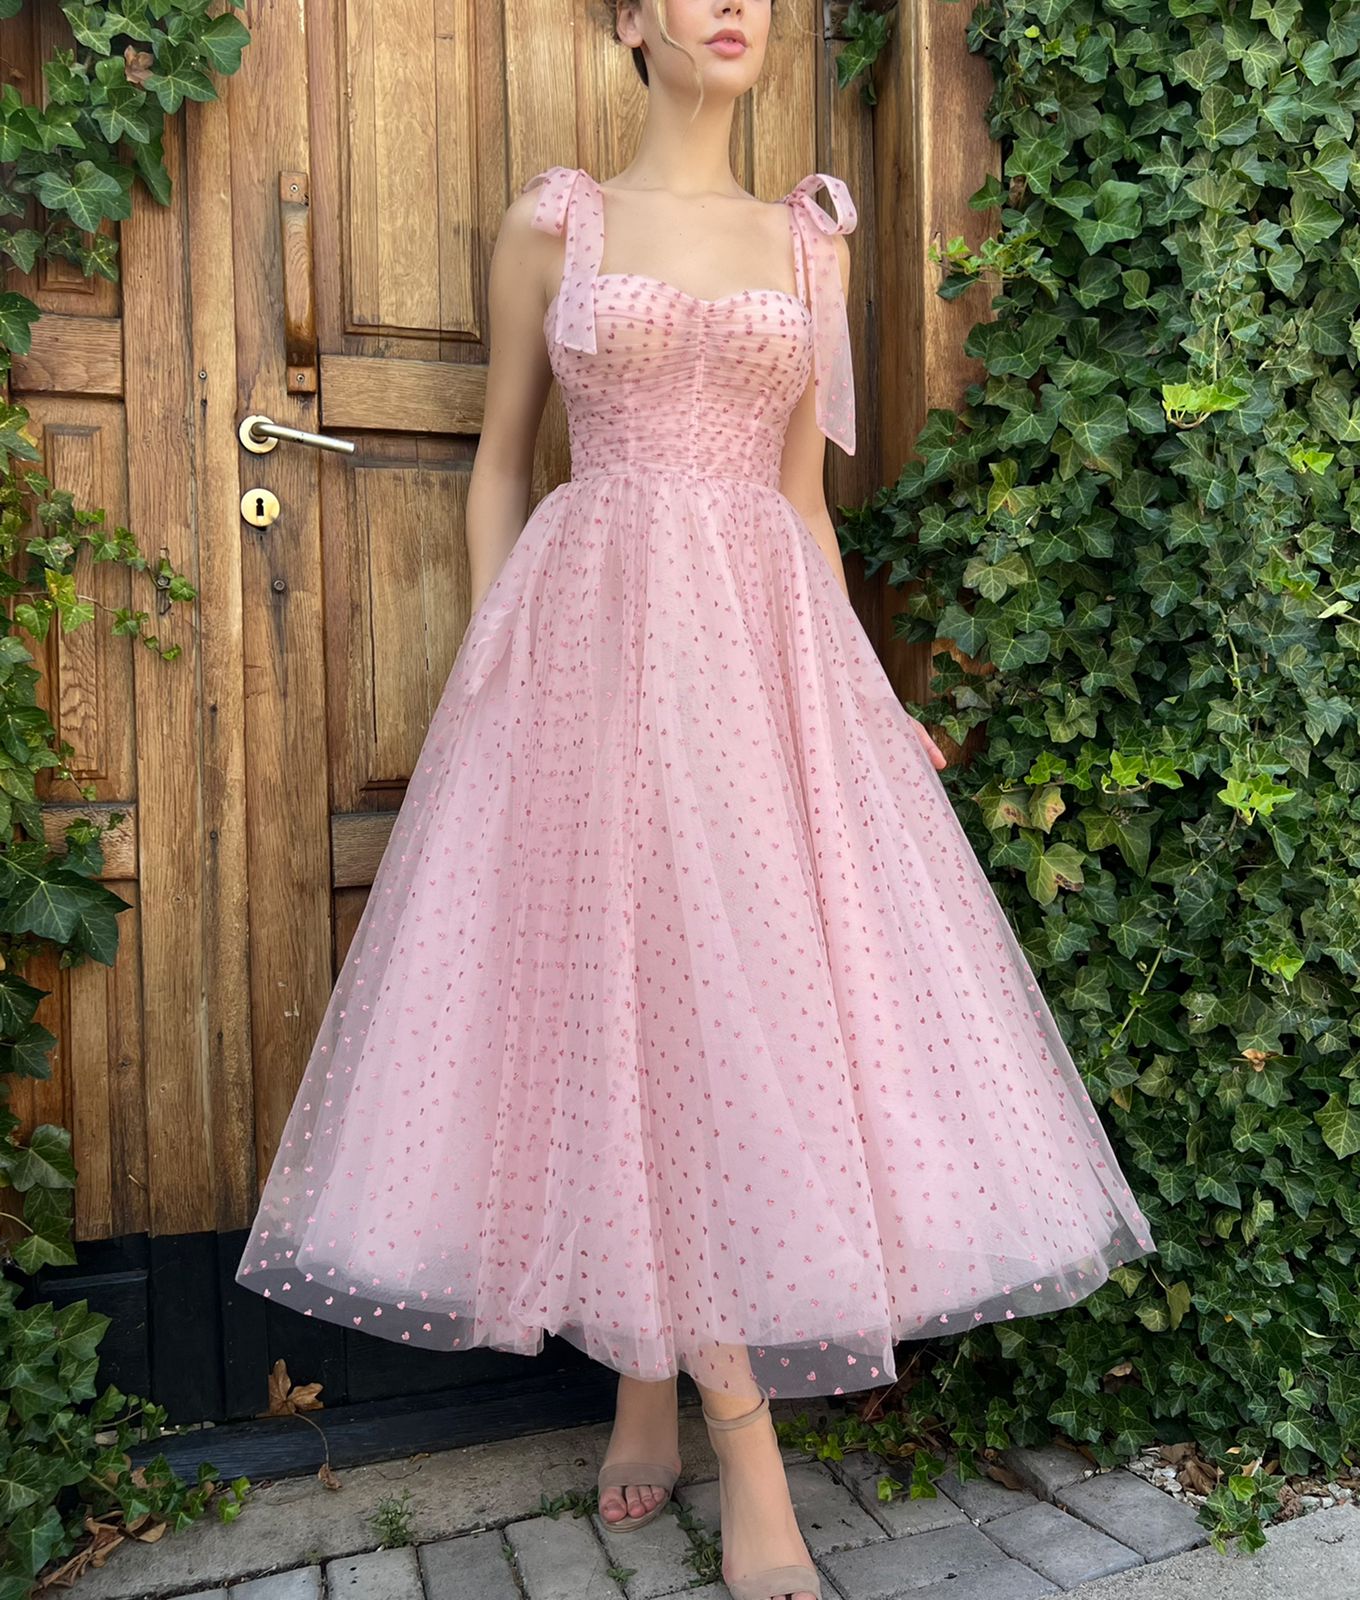 Pink midi dress with spaghetti straps and hearty fabric